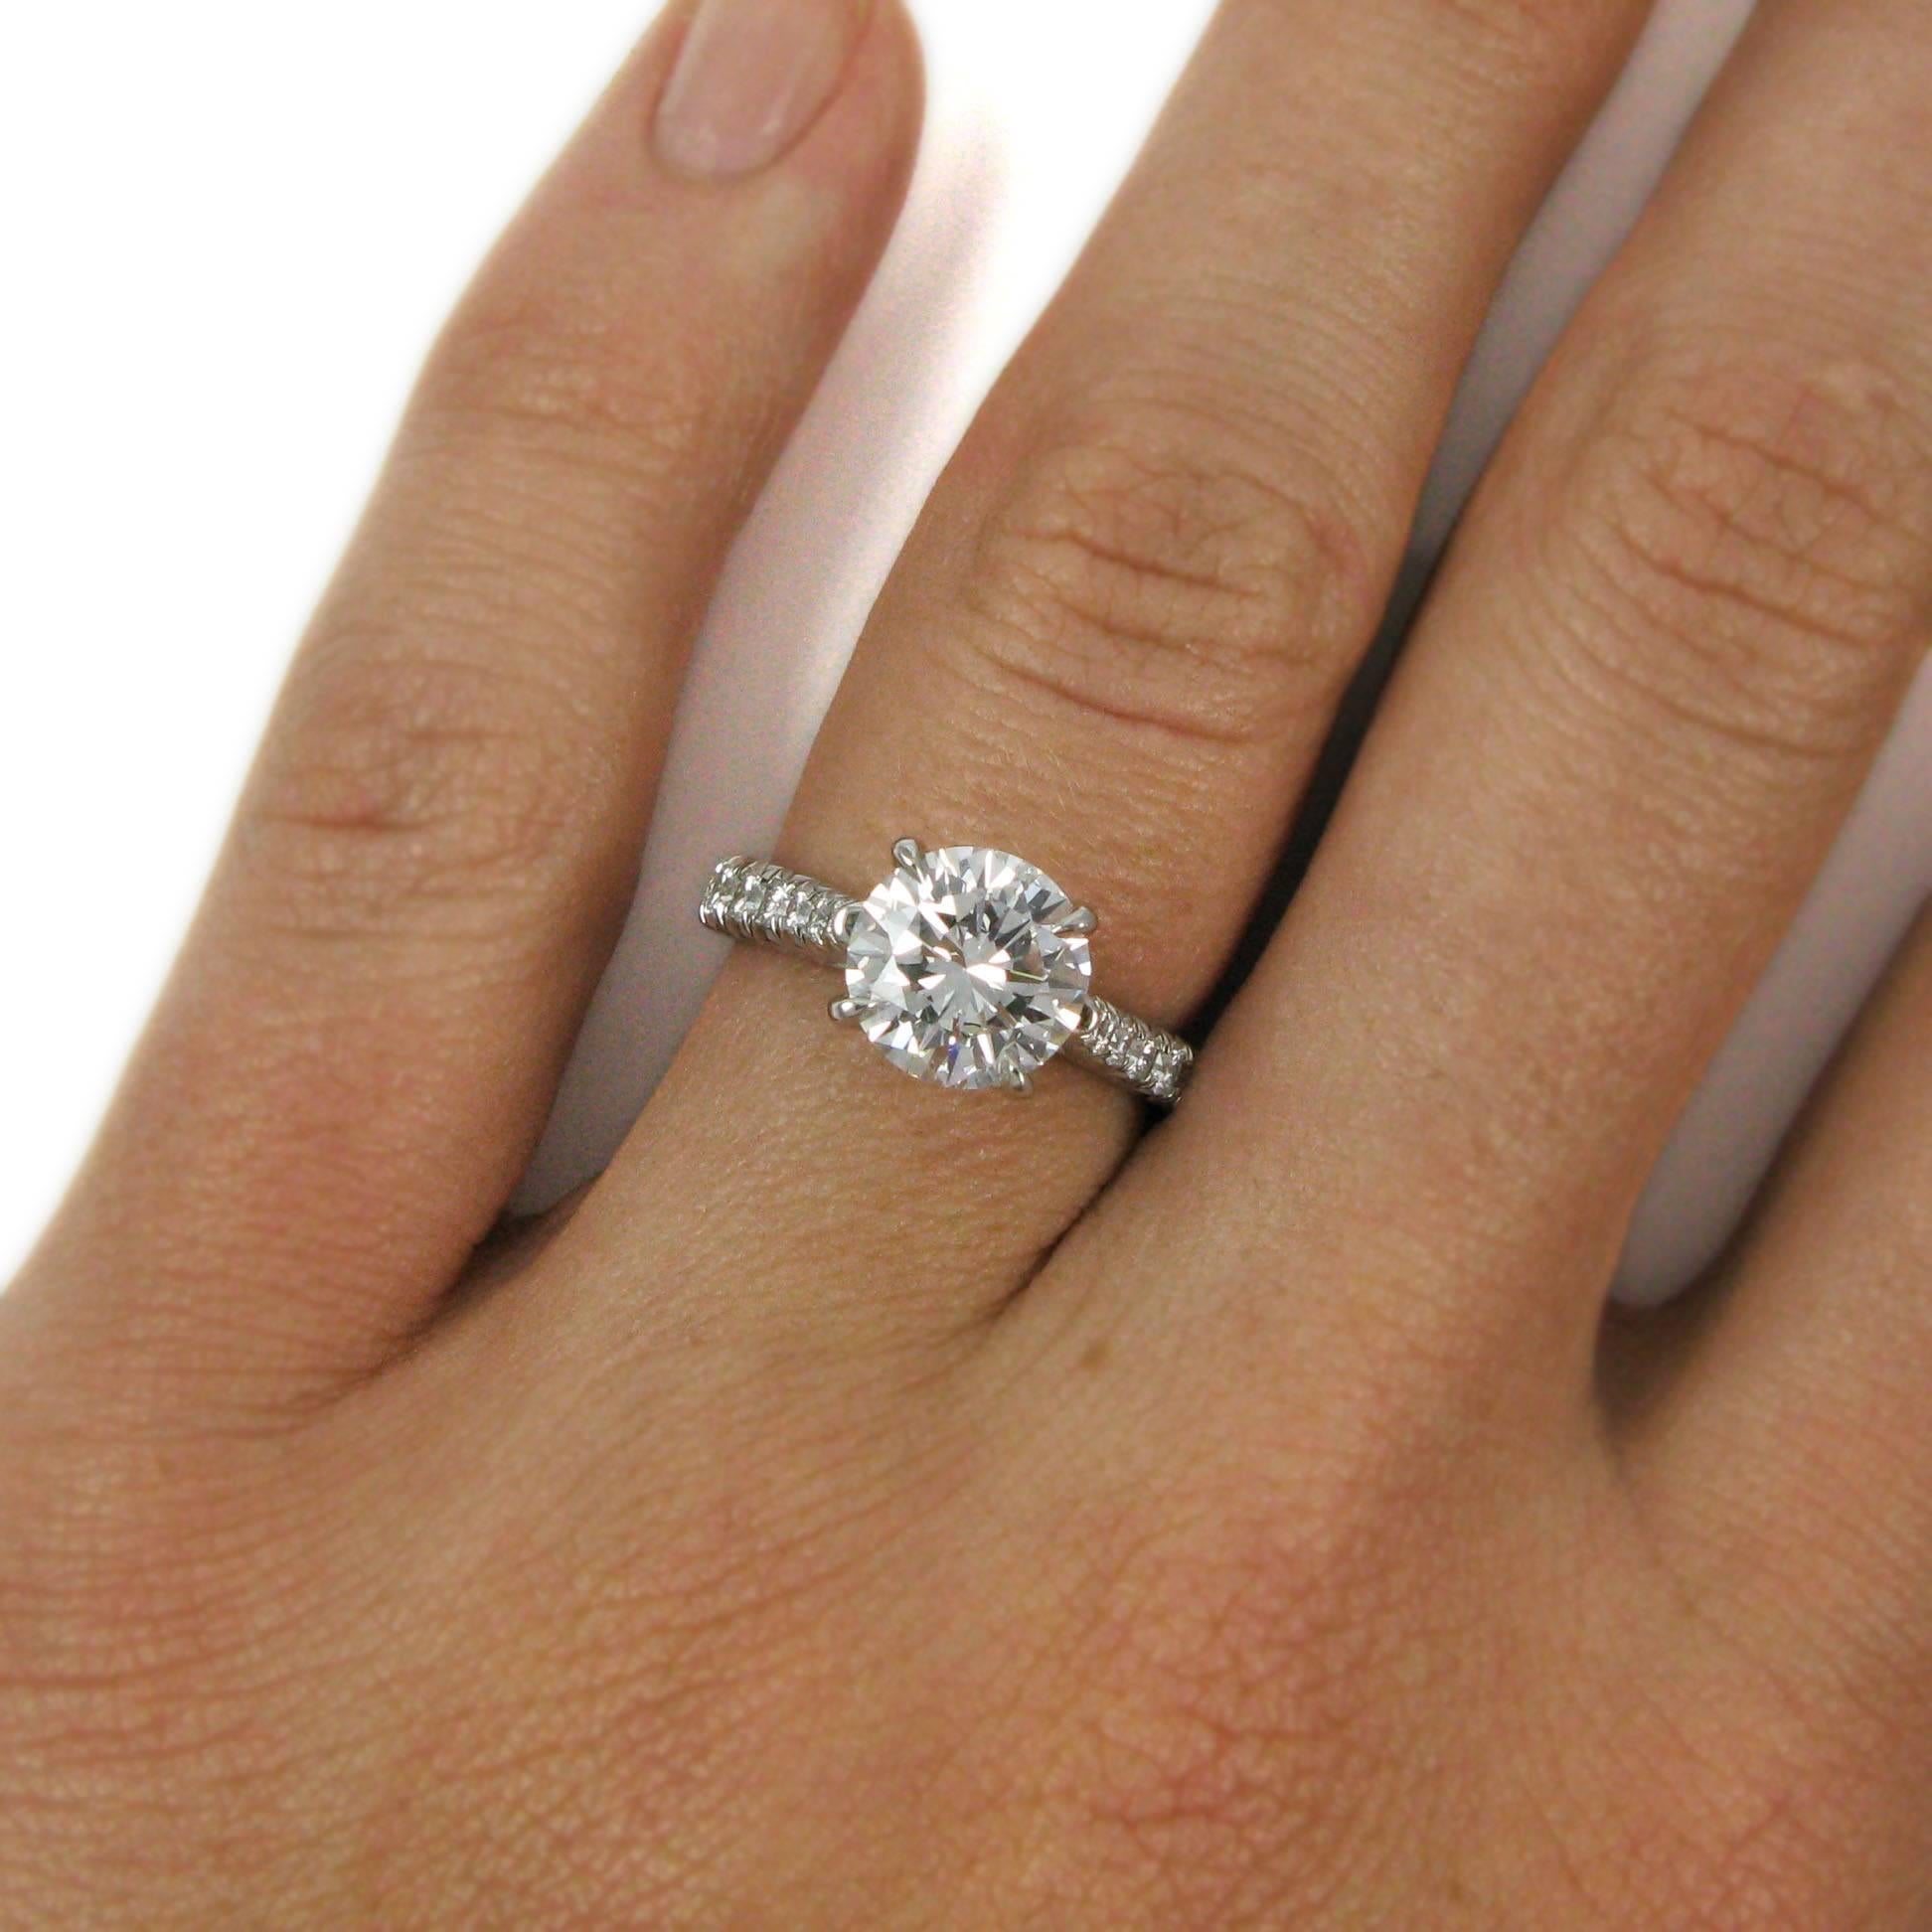 A real sparkler! This stunning platinum ring features a 2.01 carat round brilliant-cut diamond with D color and VS1 clarity. The diamond is claw-set into a high basket setting, and the mounting is accented by approx. 1.15 carats of graduated round